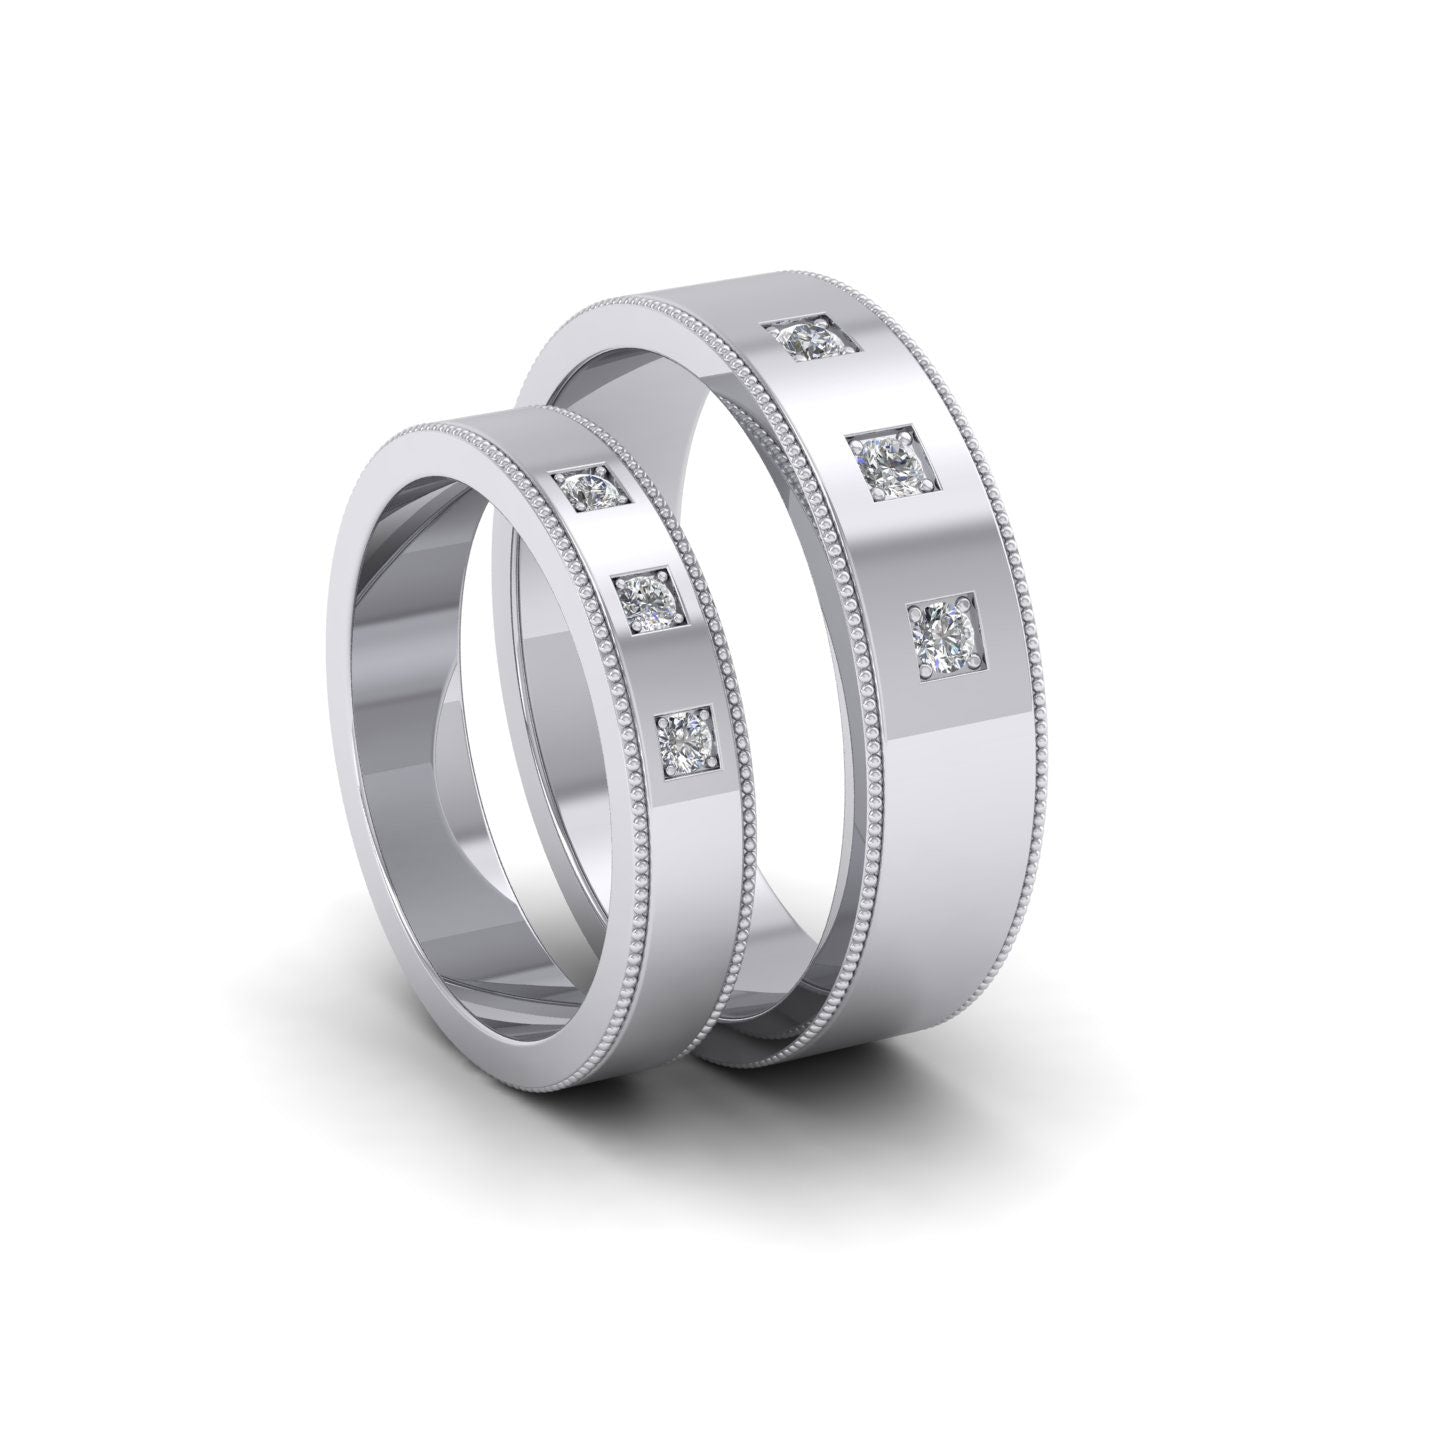 Three Diamonds With Square Setting 9ct White Gold 4mm Wedding Ring With Millgrain Edge